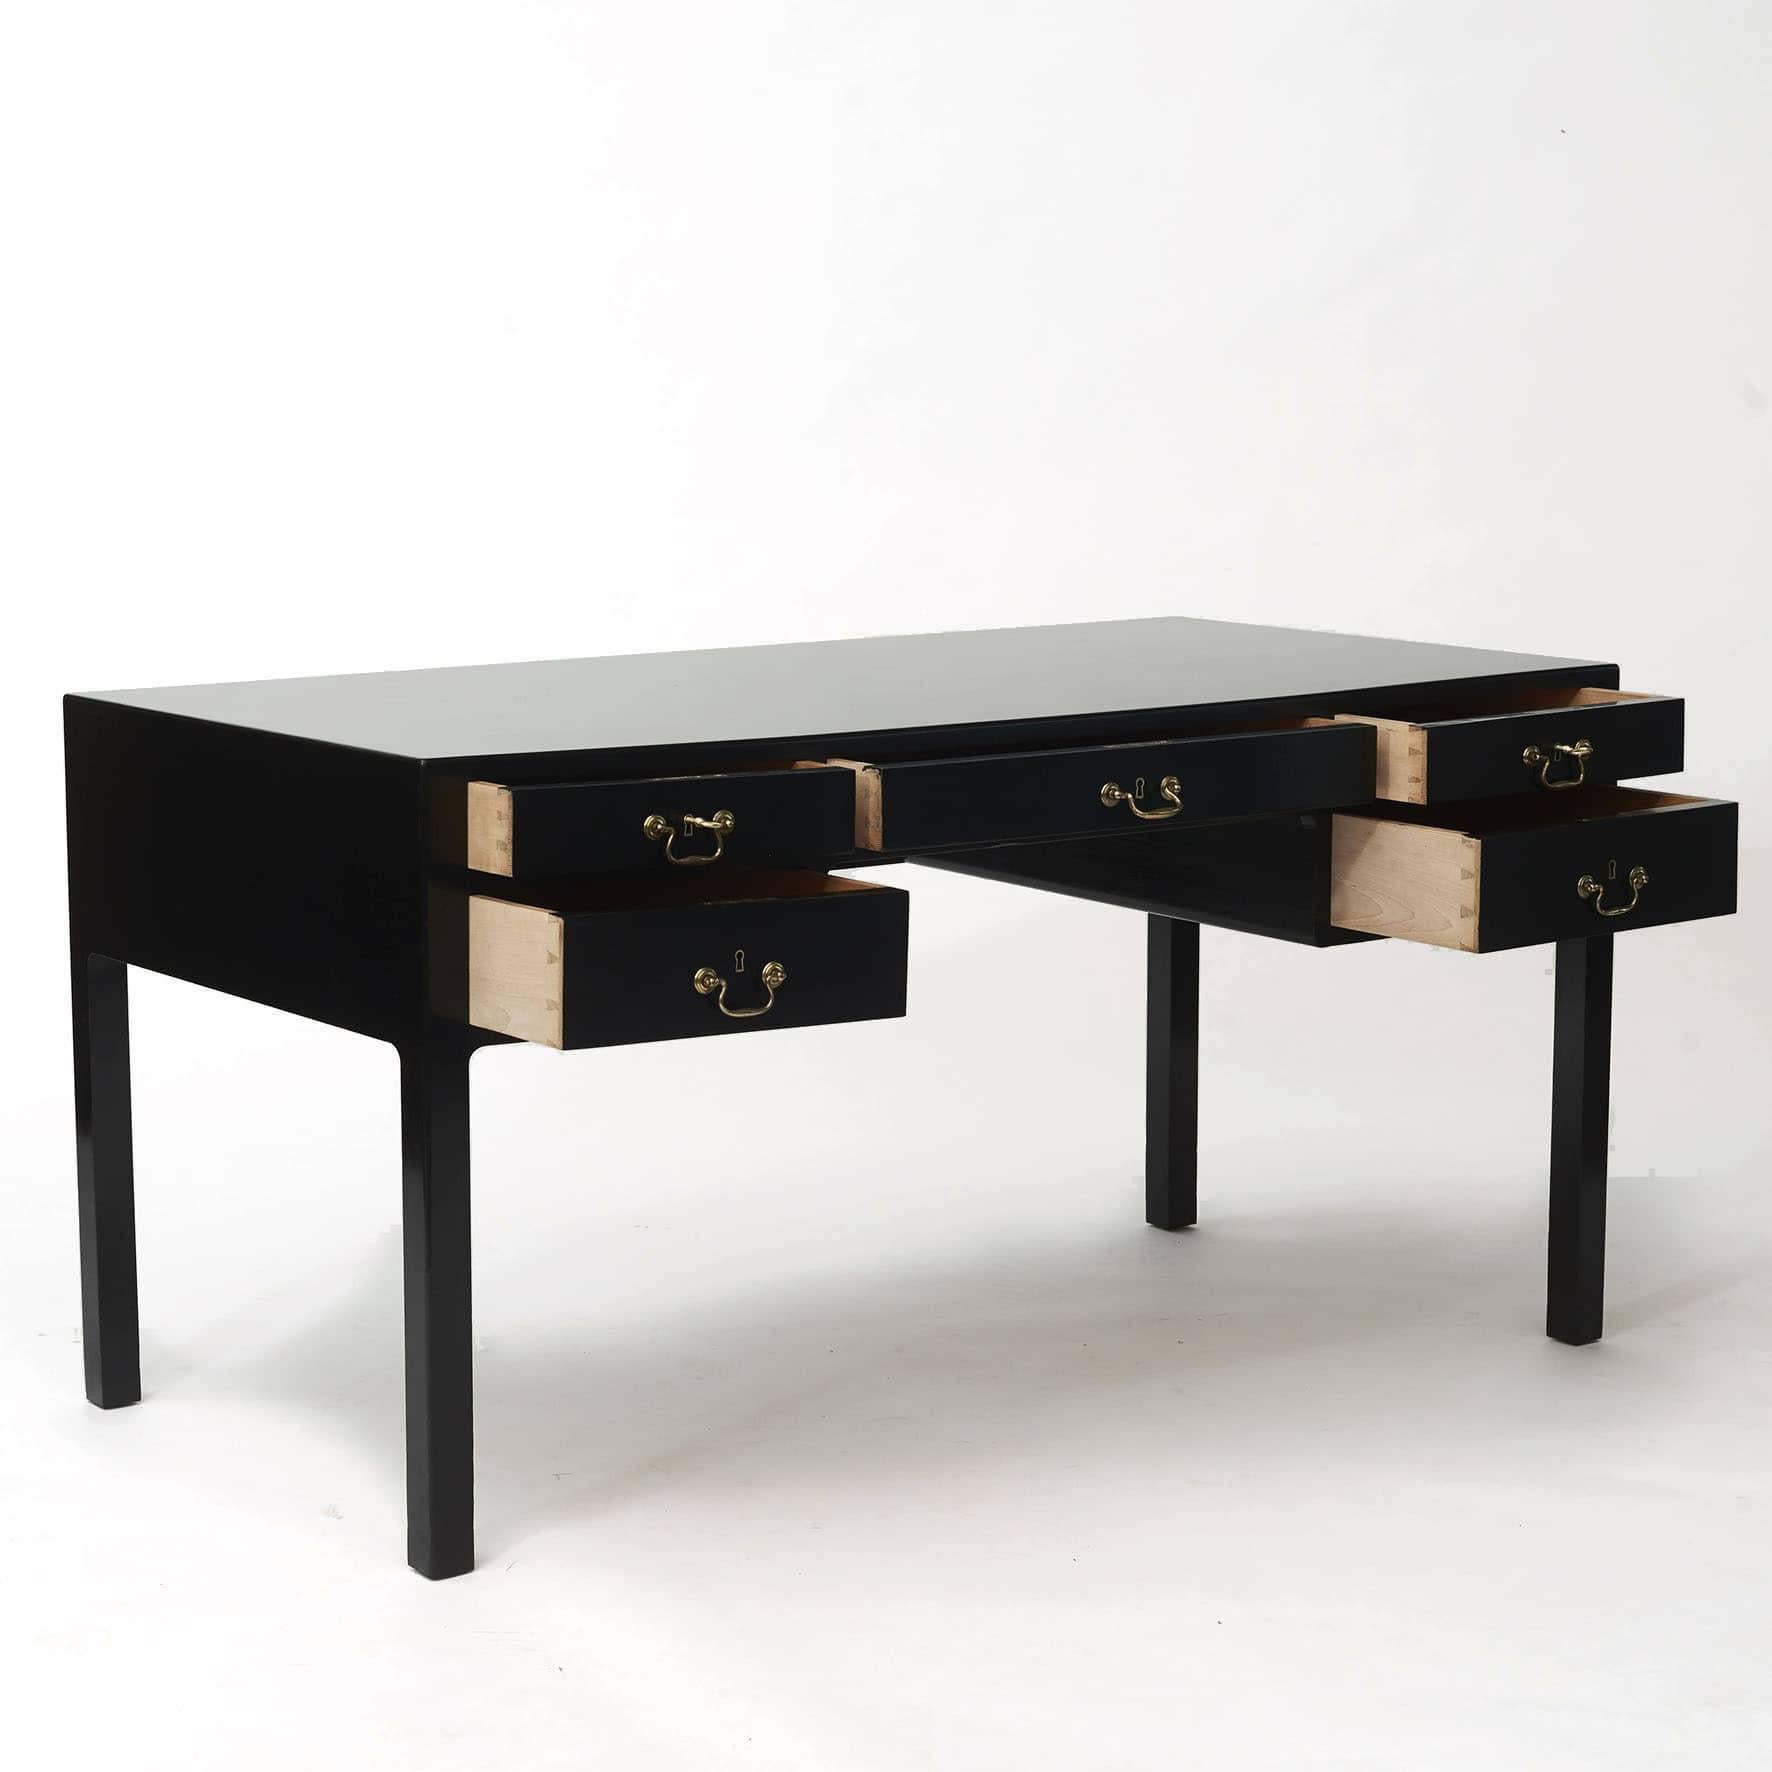 Danish Cabinetmaker desk.
Black polished mahogany with 5 drawers.
Freestanding.

Denmark approx. 1950.
HS 94036010